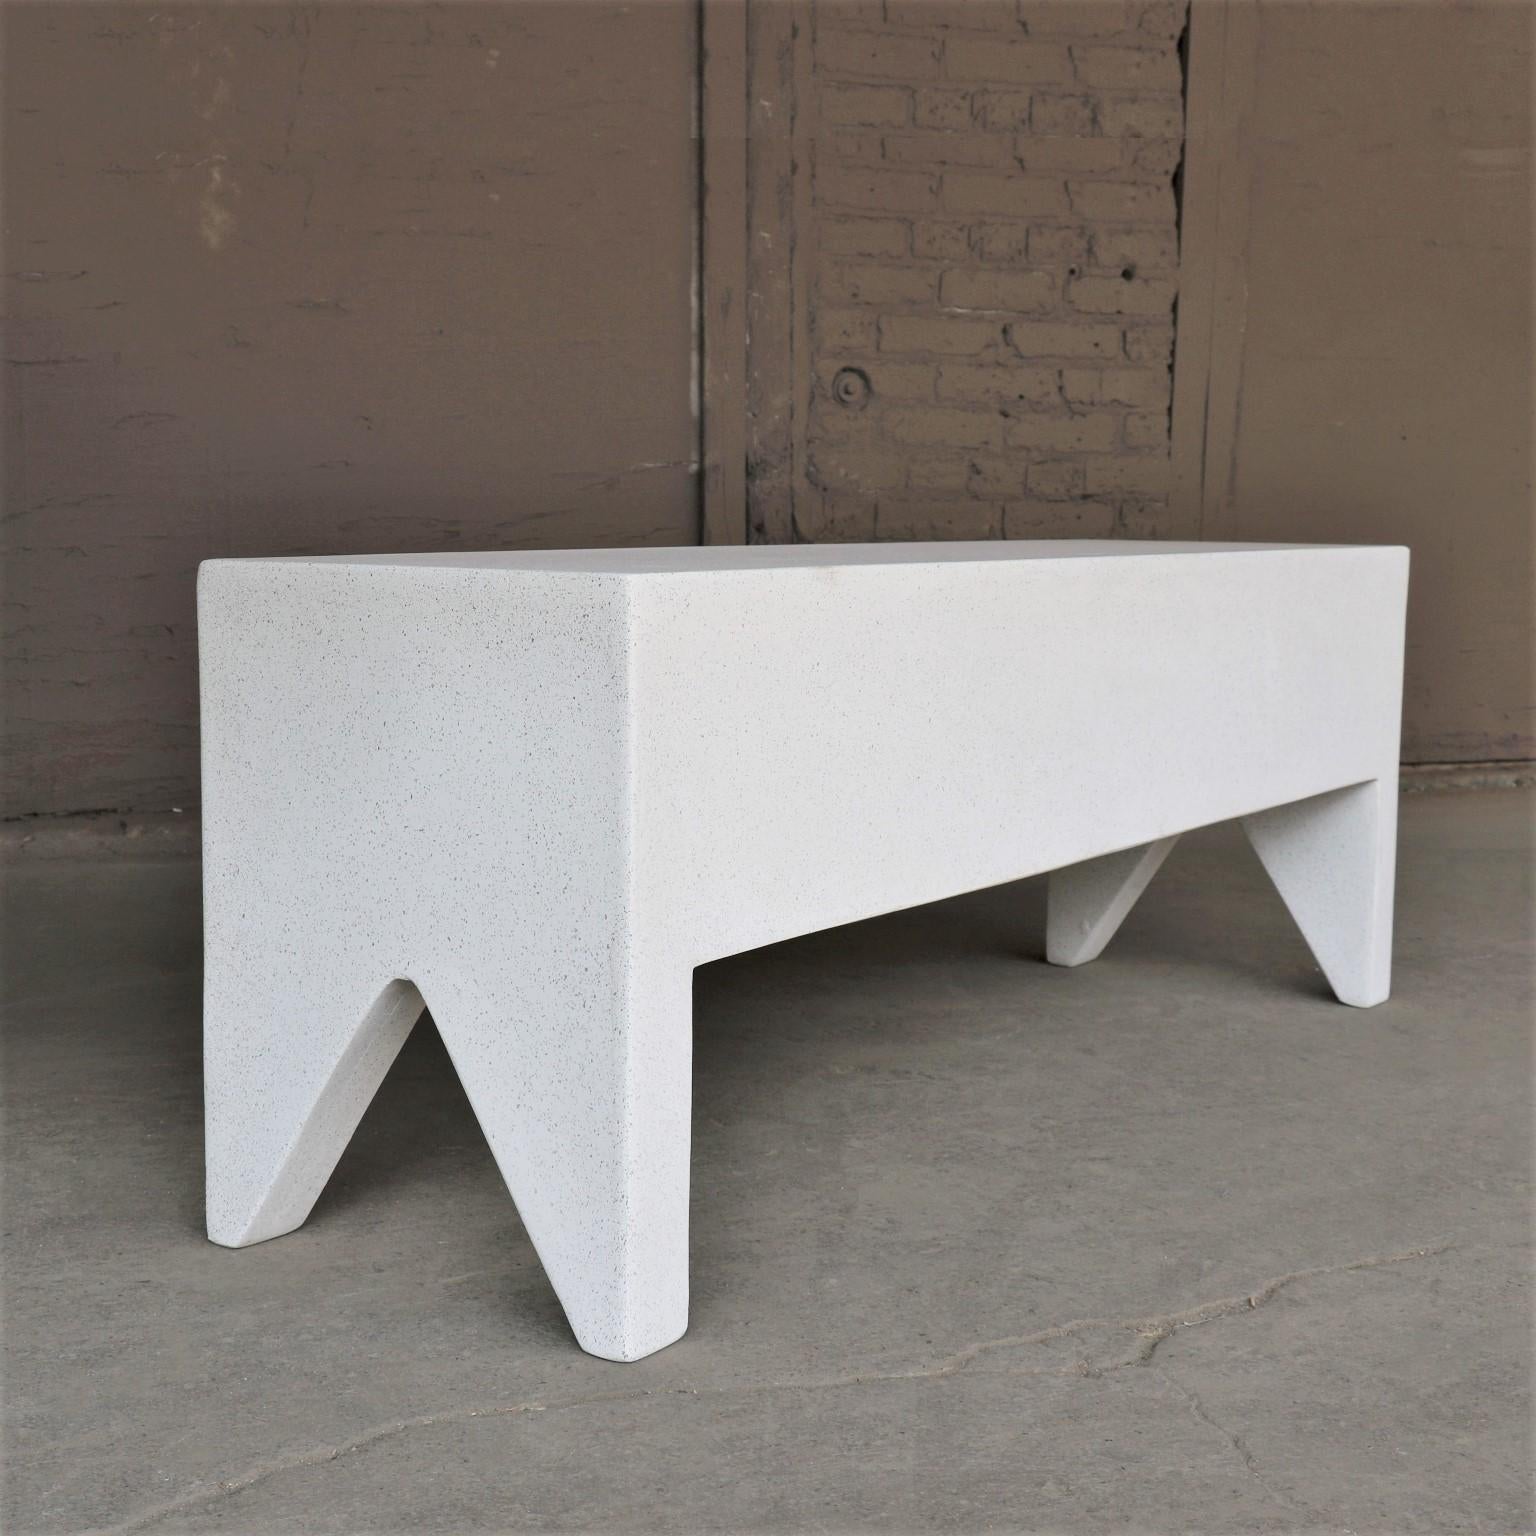 A hint of ornament. Americana at its Brutalist functional extreme.

Dimensions: Width 50 in. (127 cm), depth 14 in. (35.5cm), height 18 in. (45.7 cm). Weight 45 lbs. (20.4 kg). No assembly required.

Finish Color options:
white stone (shown)
natural